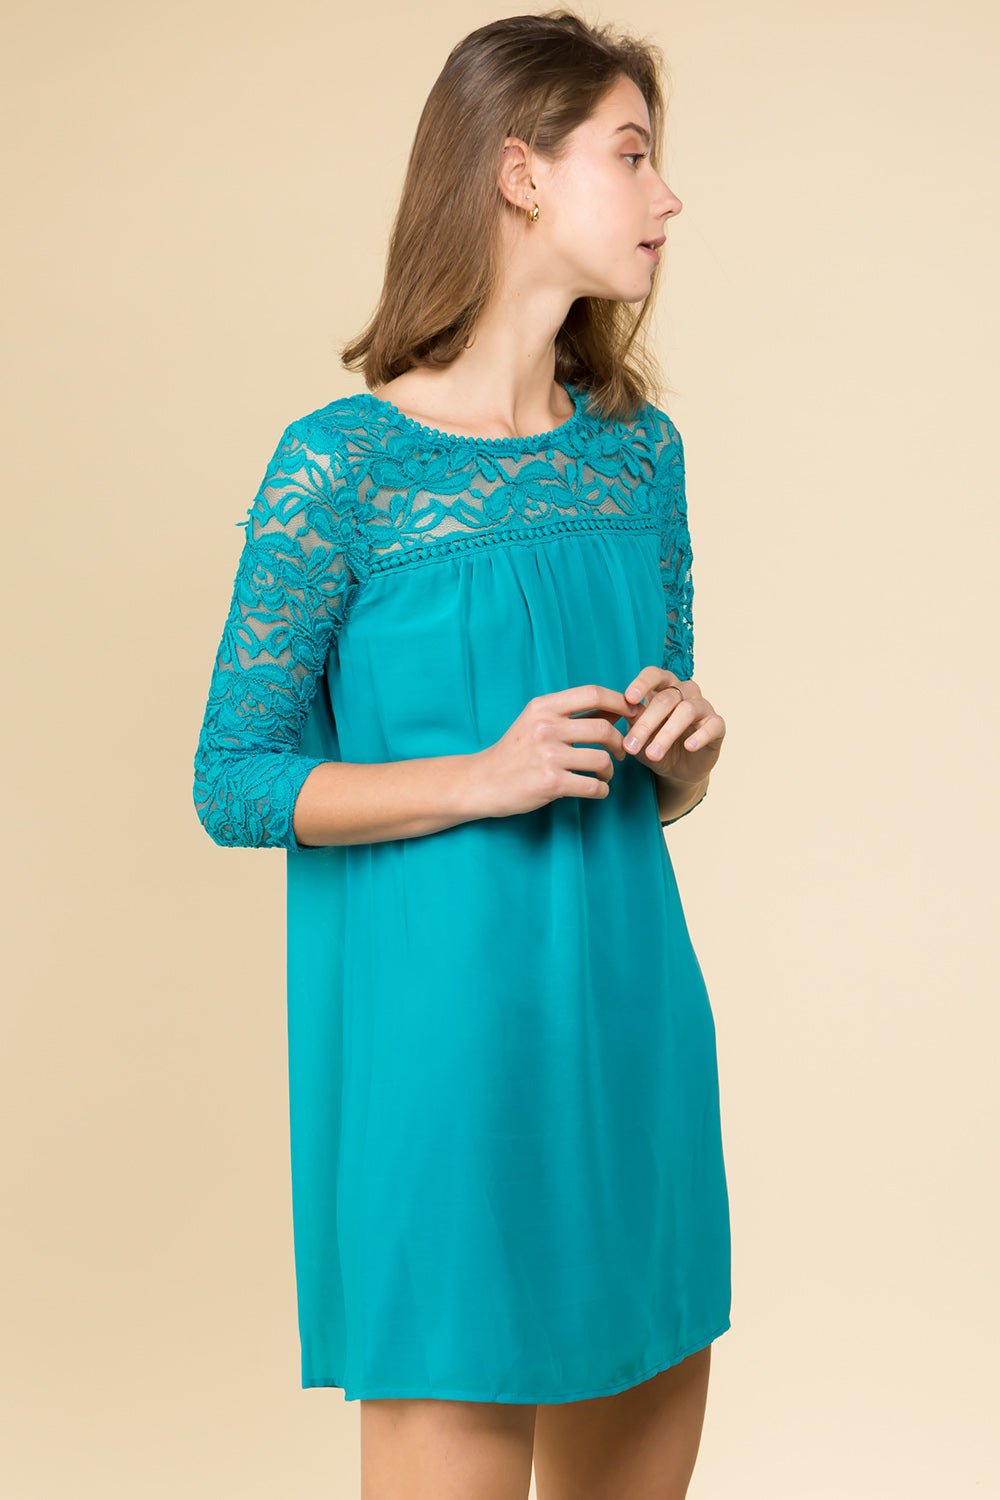 TEAL BABYDOLL DRESS WITH LACE TRIM